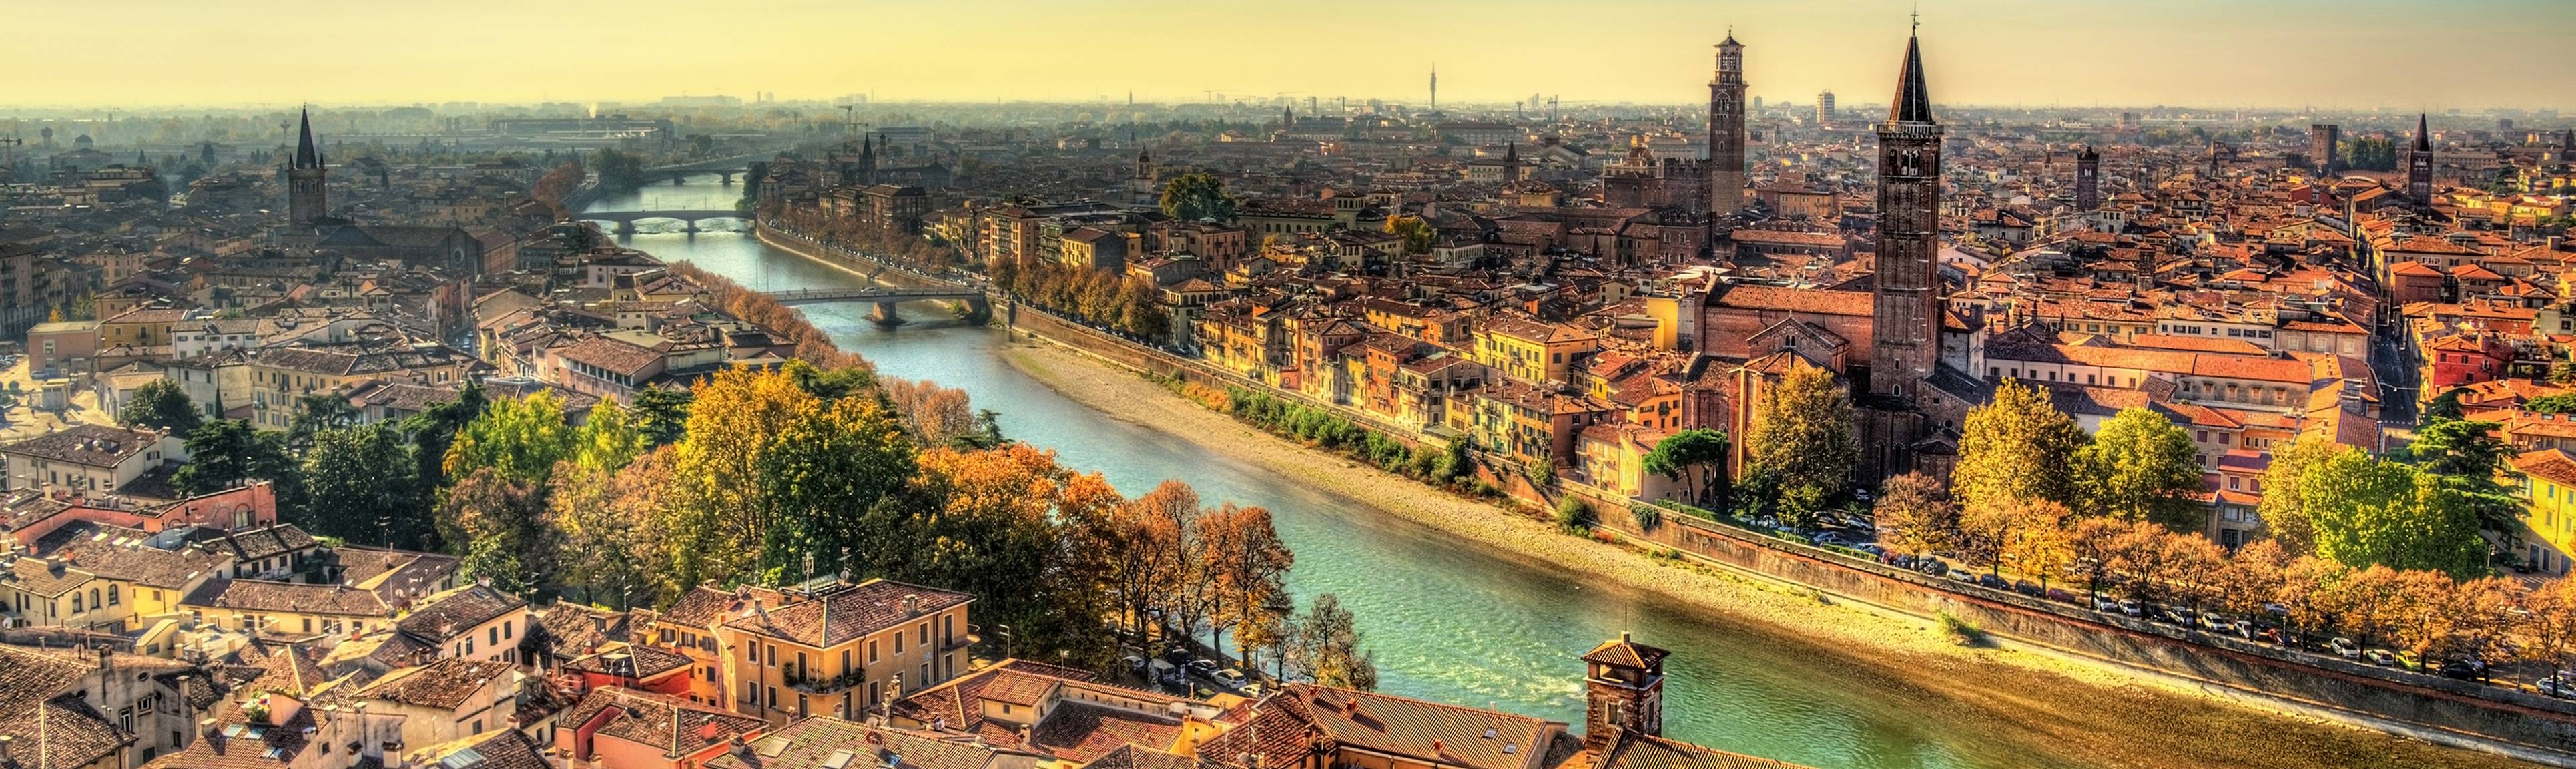 Bird's eye view of the river and Verona, Italy